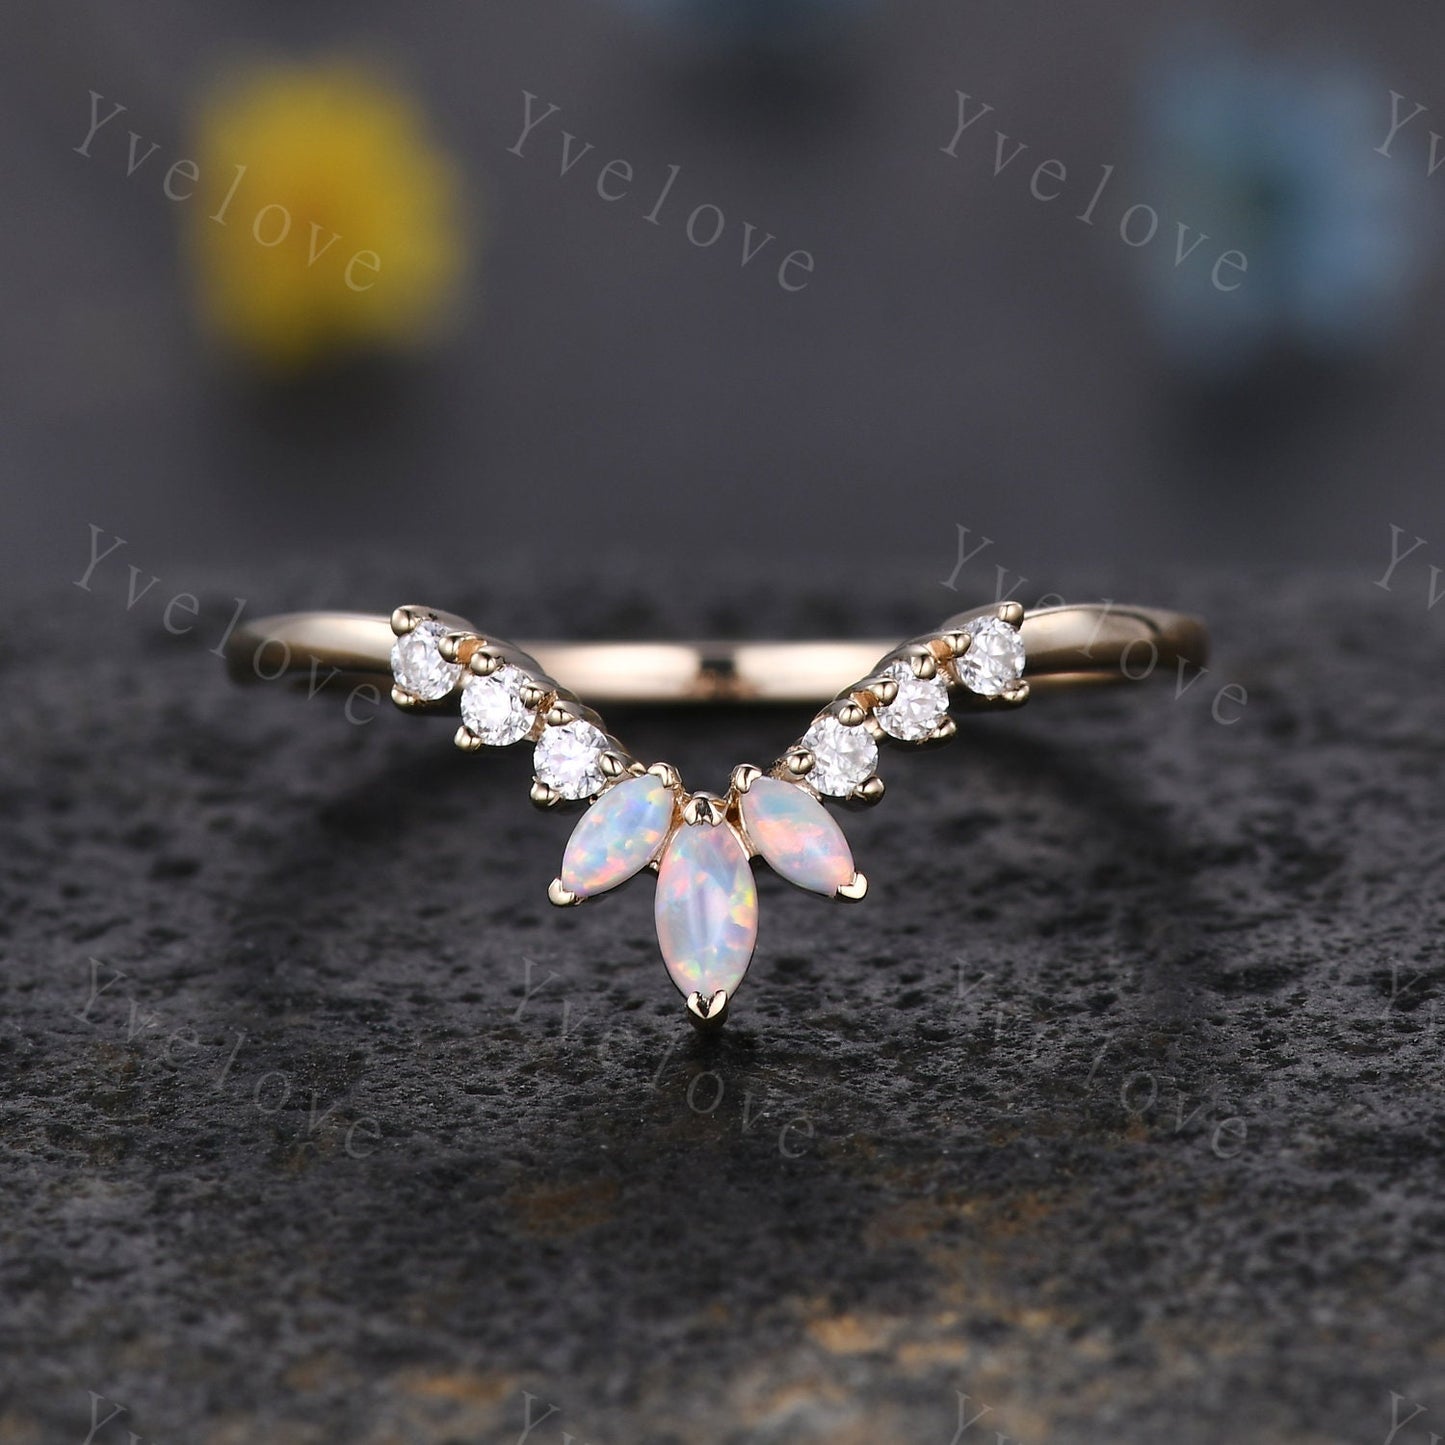 Art Deco Opal Wedding Band,Marquise Opal Band,Moissanite Diamond Band,V Chevron Ring,Matching Stacking Ring Bridal Promise Ring Gift,Silver